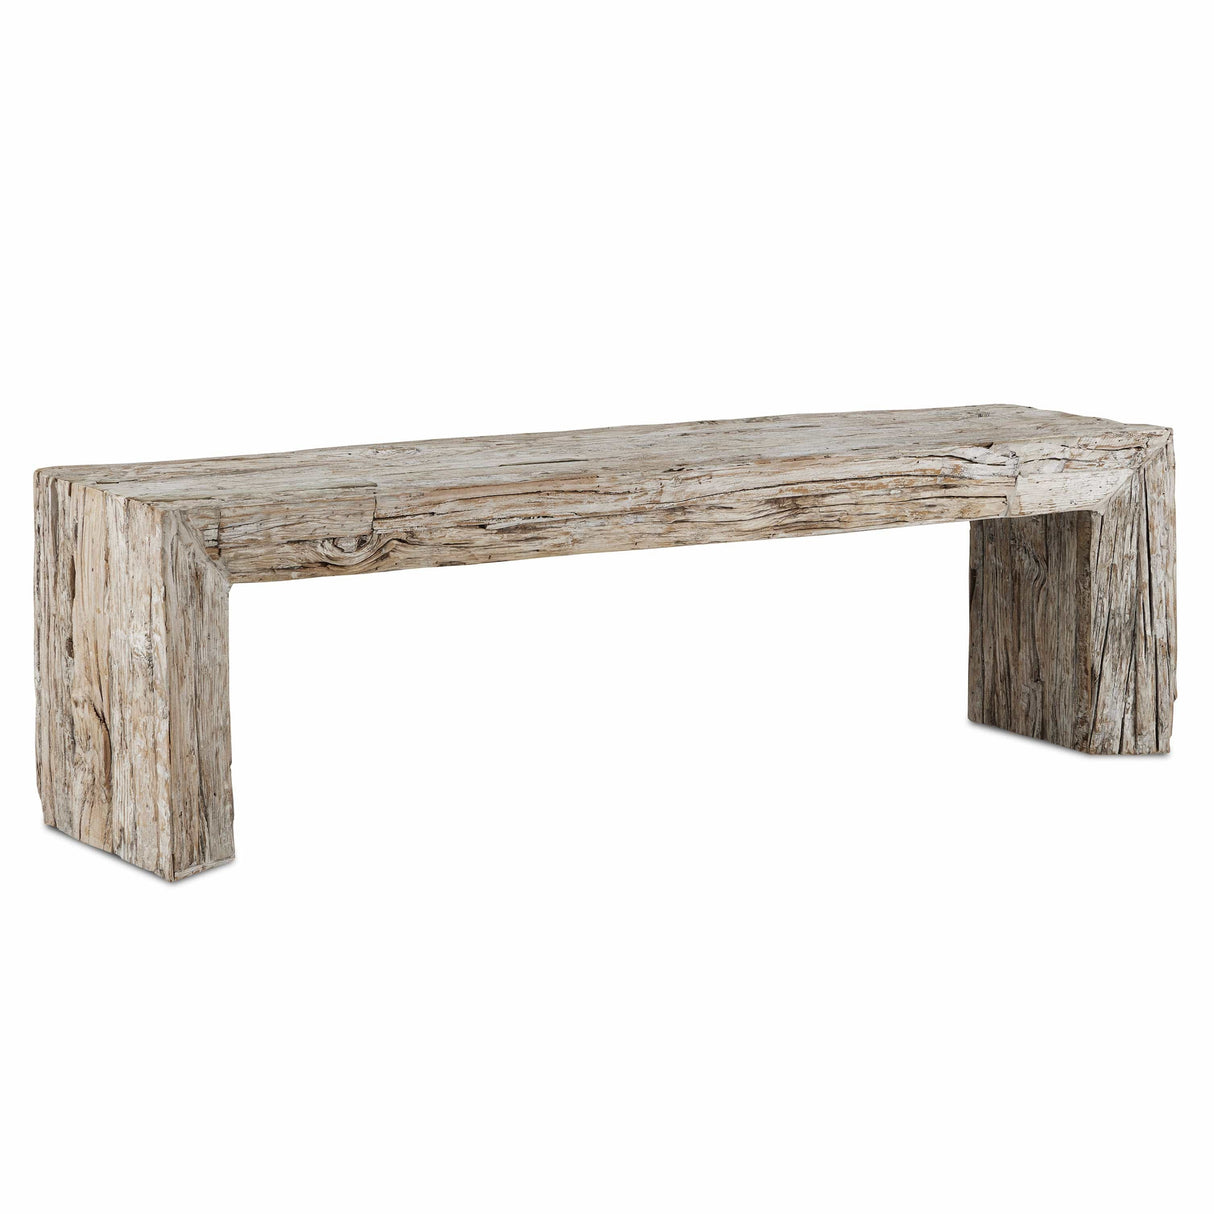 Currey and Company Kanor Bench Furniture currey-co-3000-0216